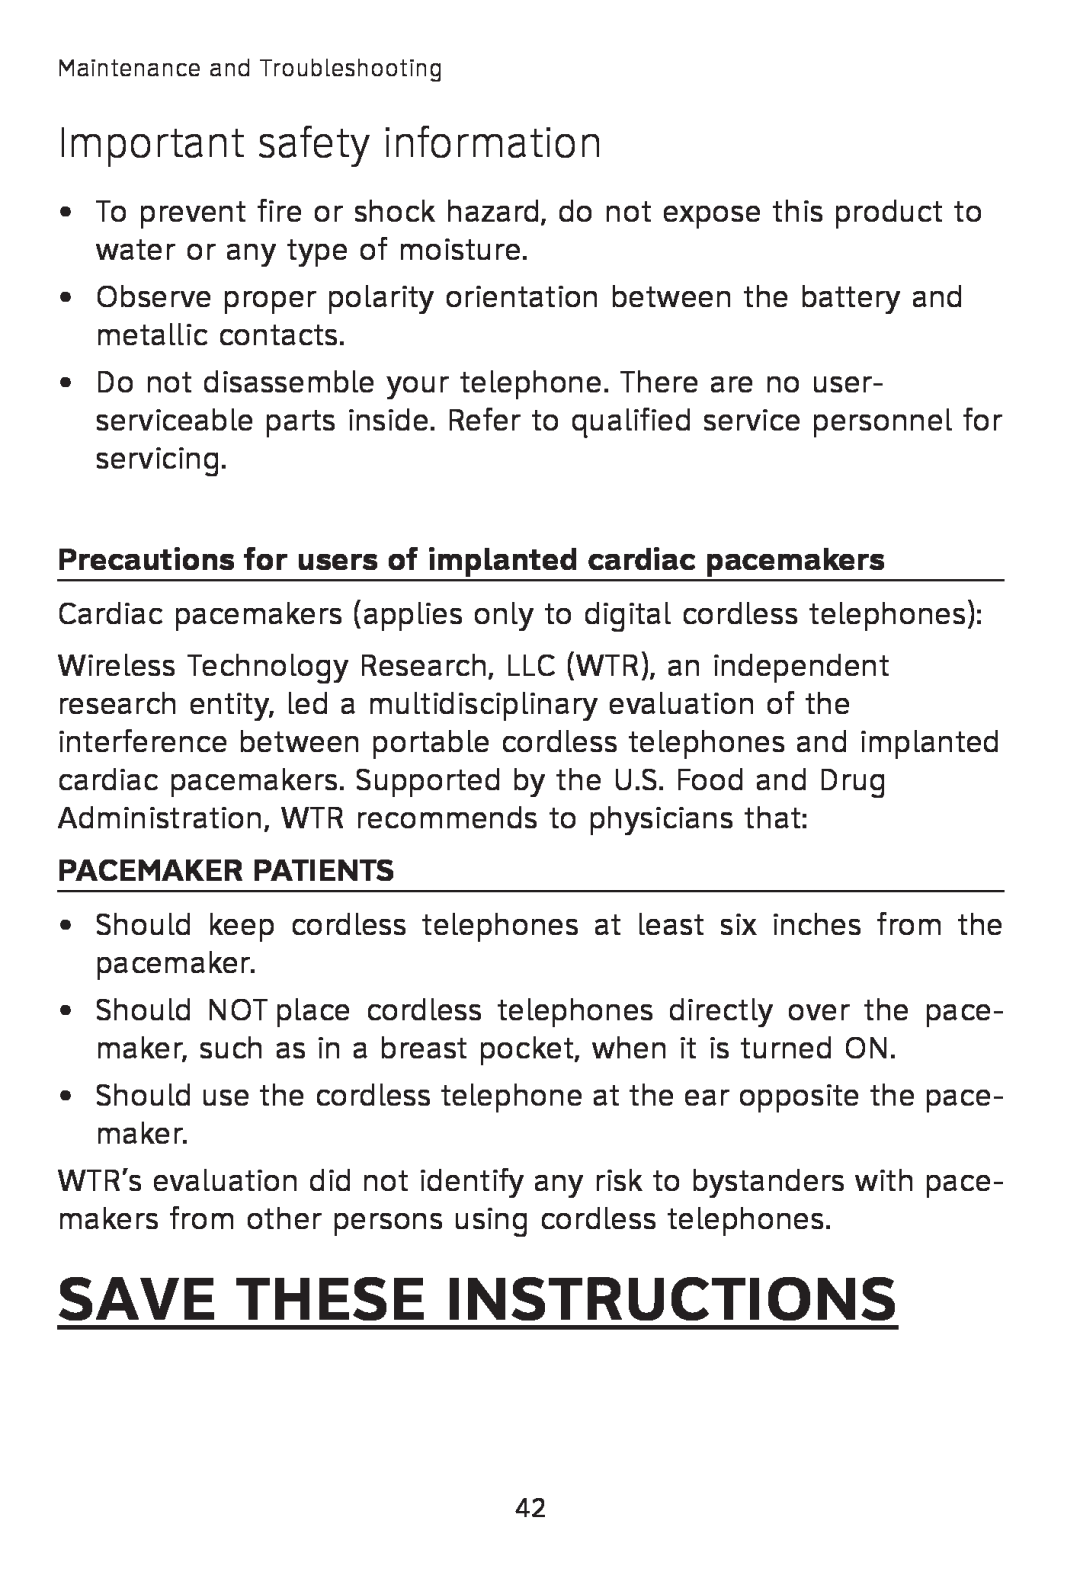 AT&T TL7600 user manual Save These Instructions, Important safety information, Pacemaker Patients 